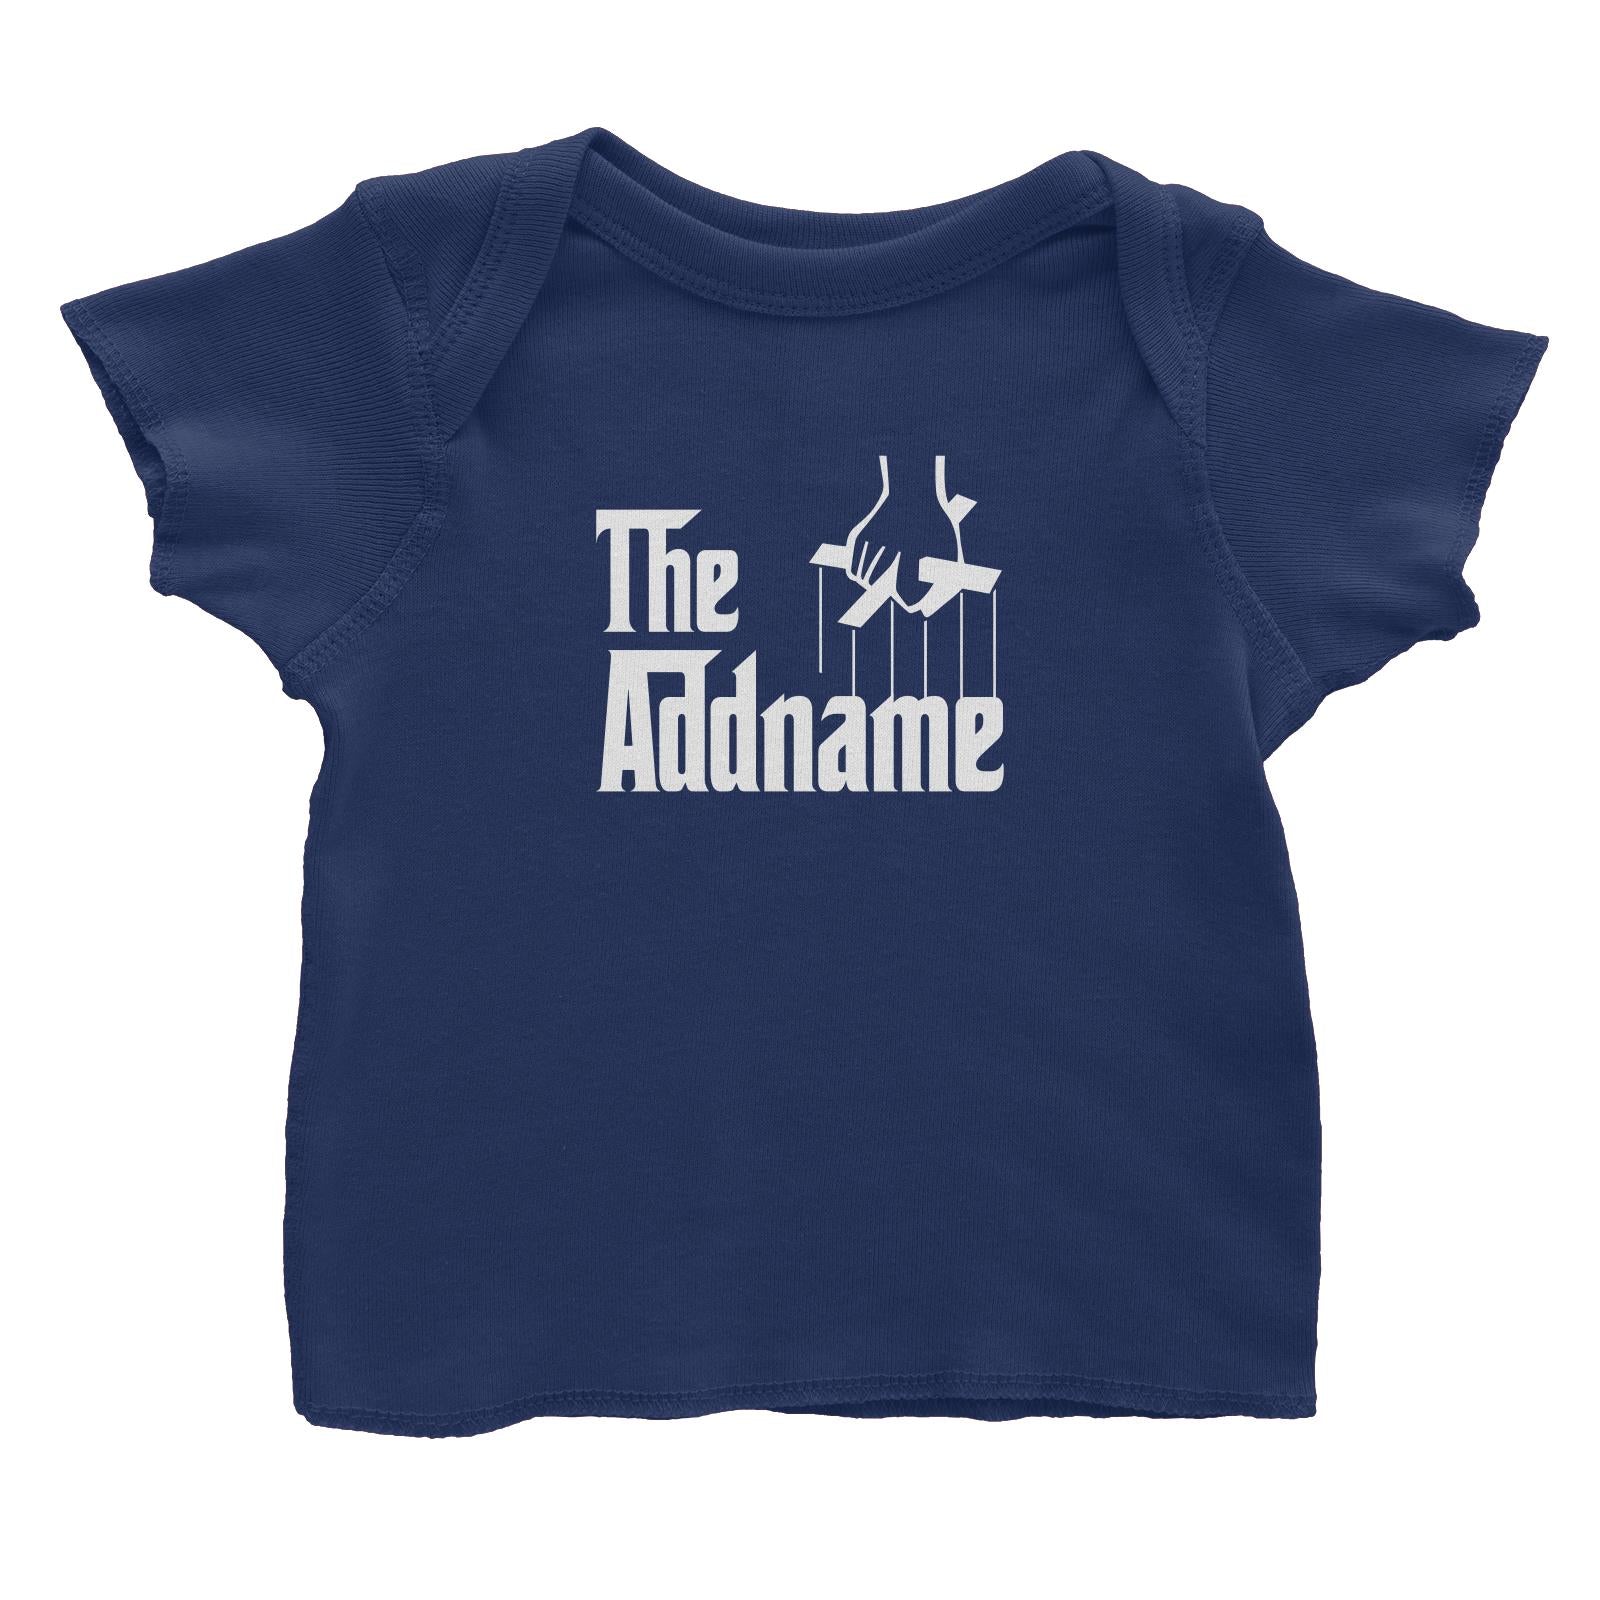 The Addname Baby T-Shirt Godfather Matching Family Personalizable Designs